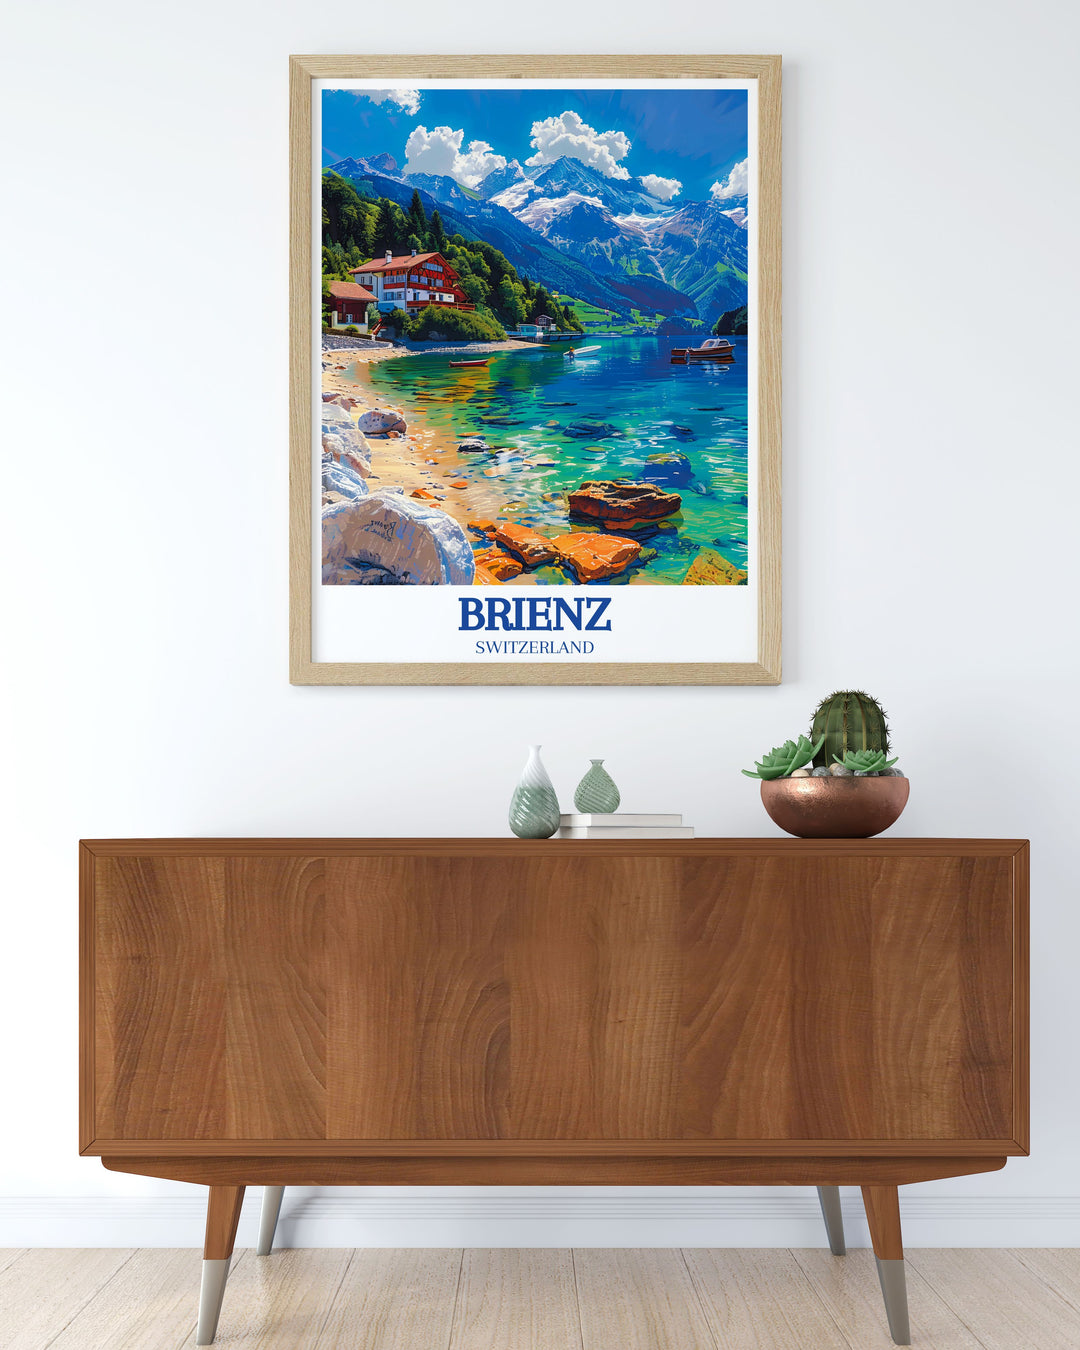 Brienz travel poster featuring the enchanting Lake Brienz, Brienzer Rothorn. Add this beautiful piece to your collection of vintage travel prints. Perfect for framing and enhancing any room.